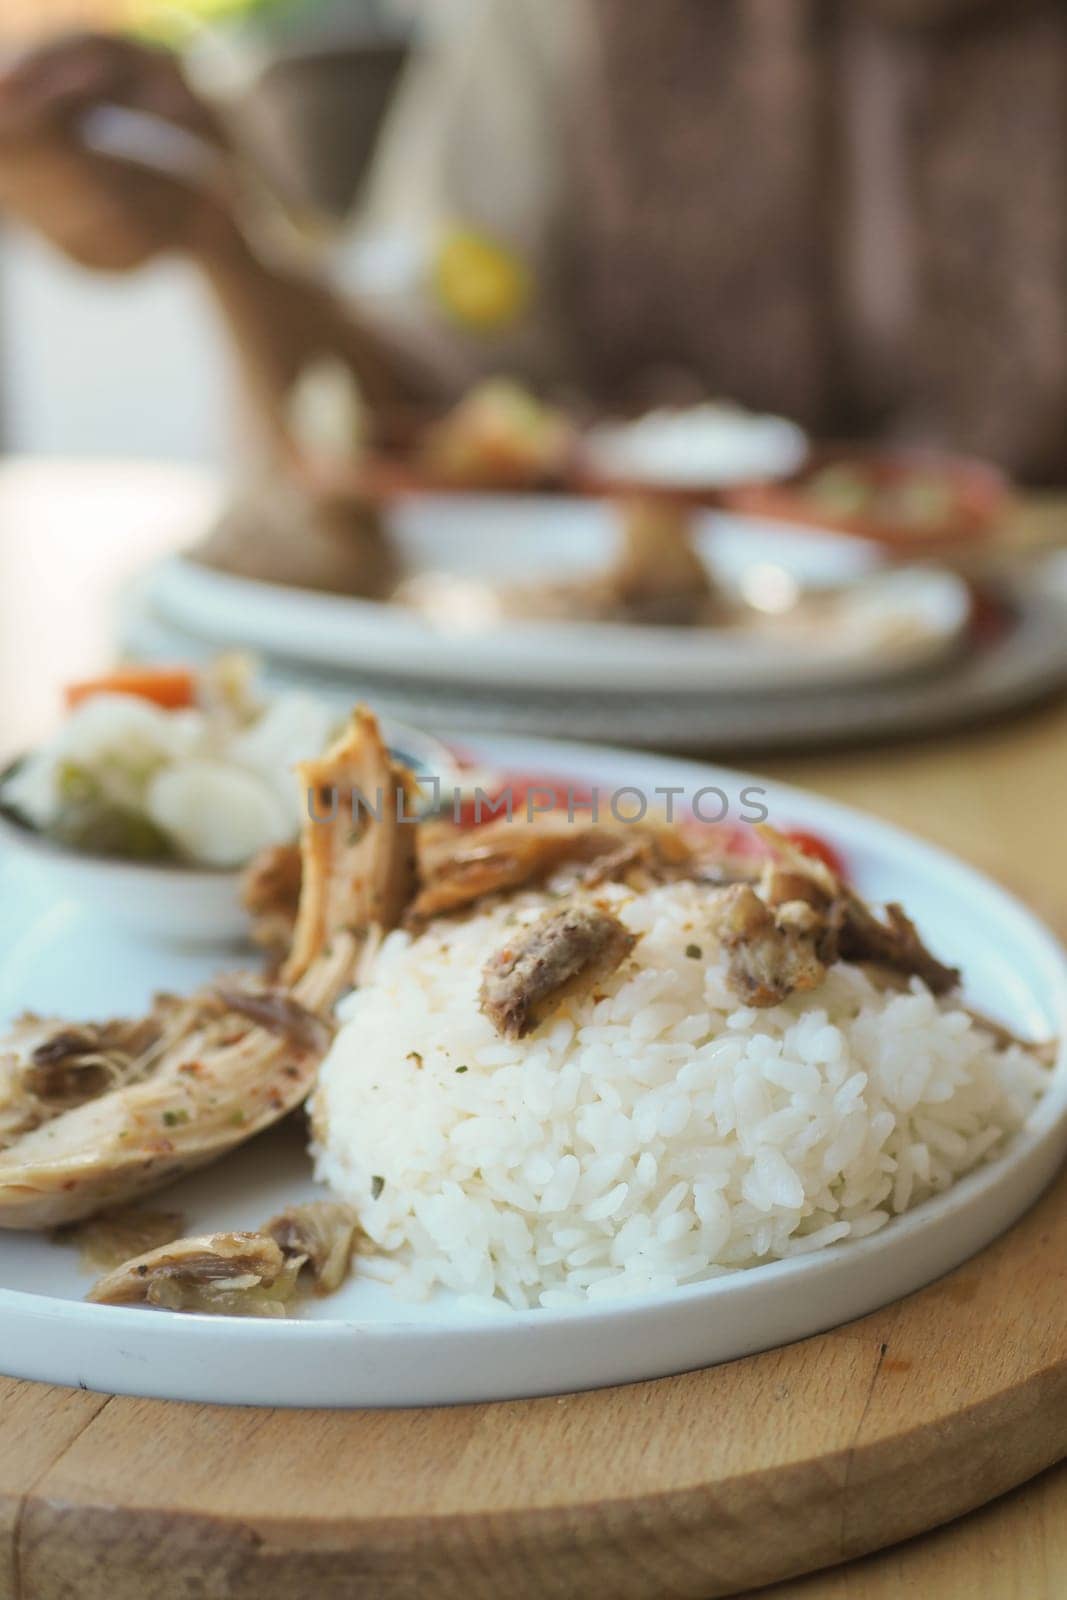 Boiled chicken, steamed rice, pink plate. by towfiq007